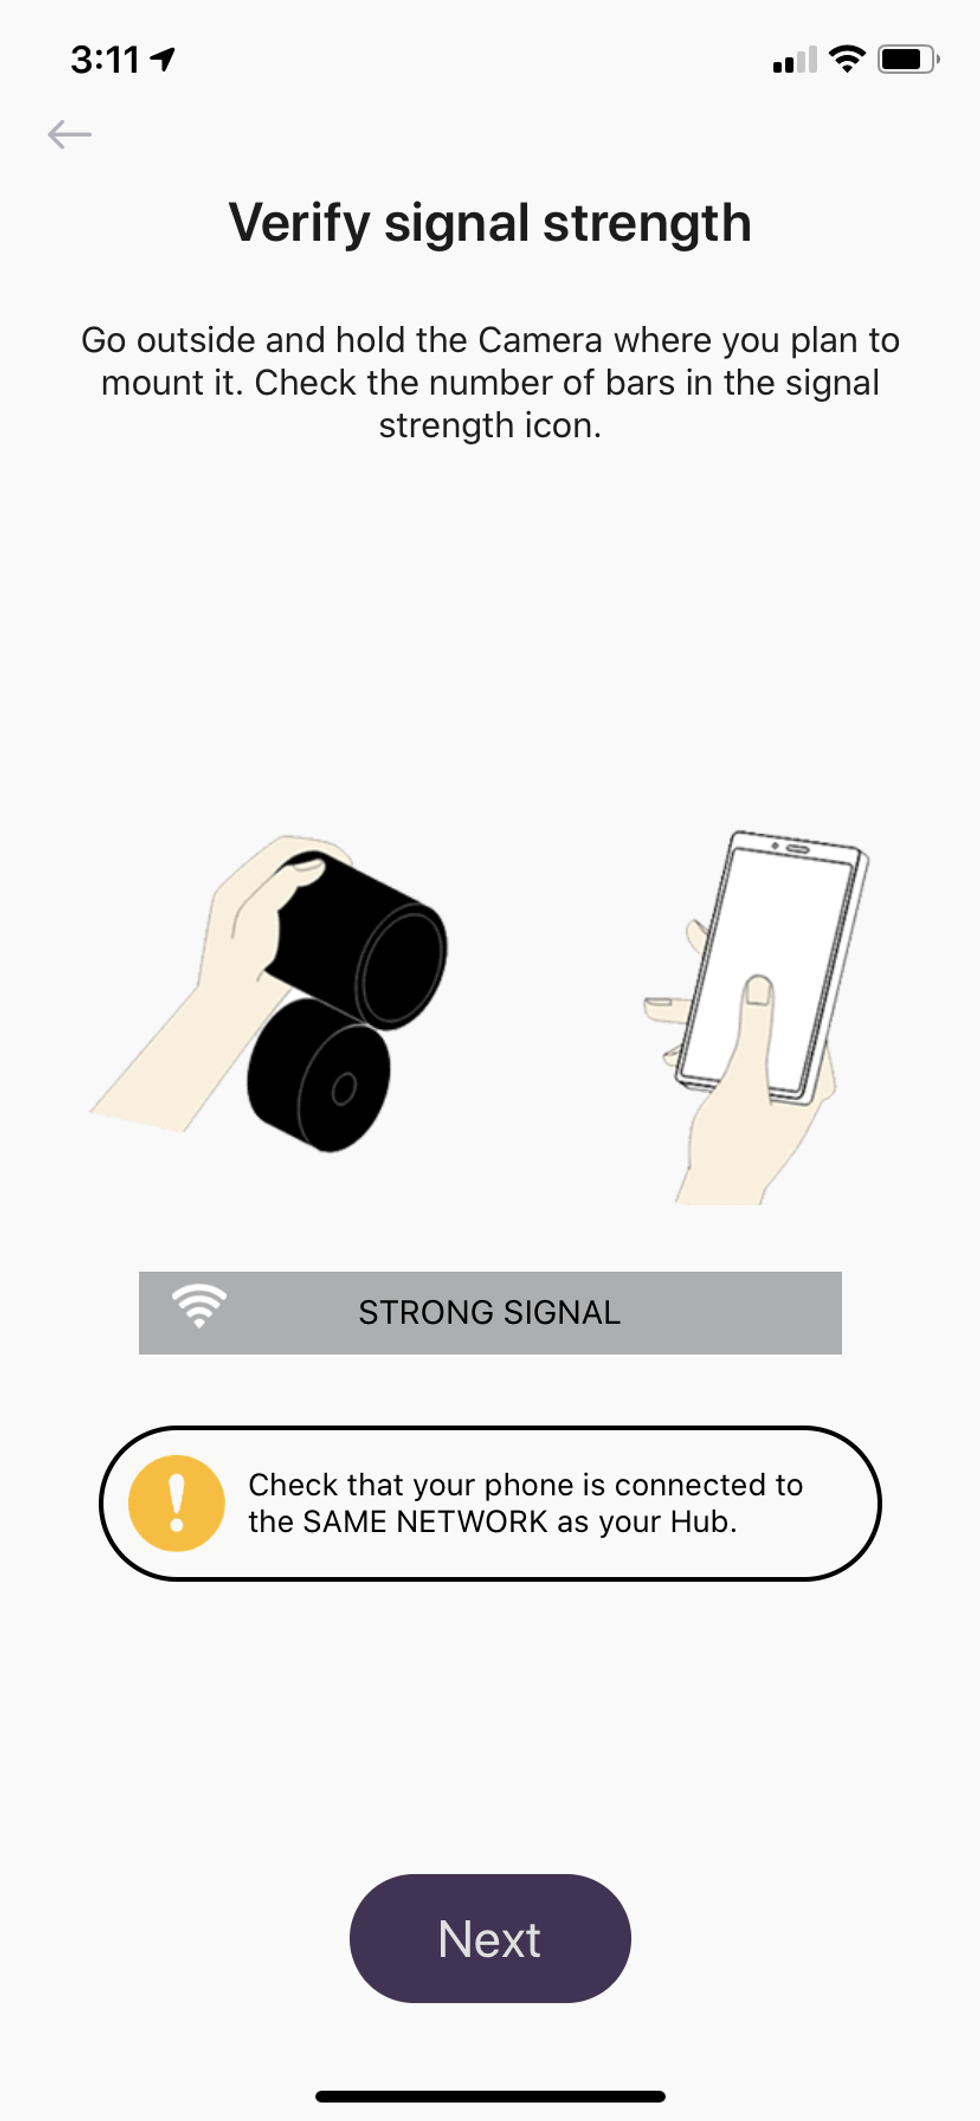 App showing how to check your wireless next connection where you plan to install the camera